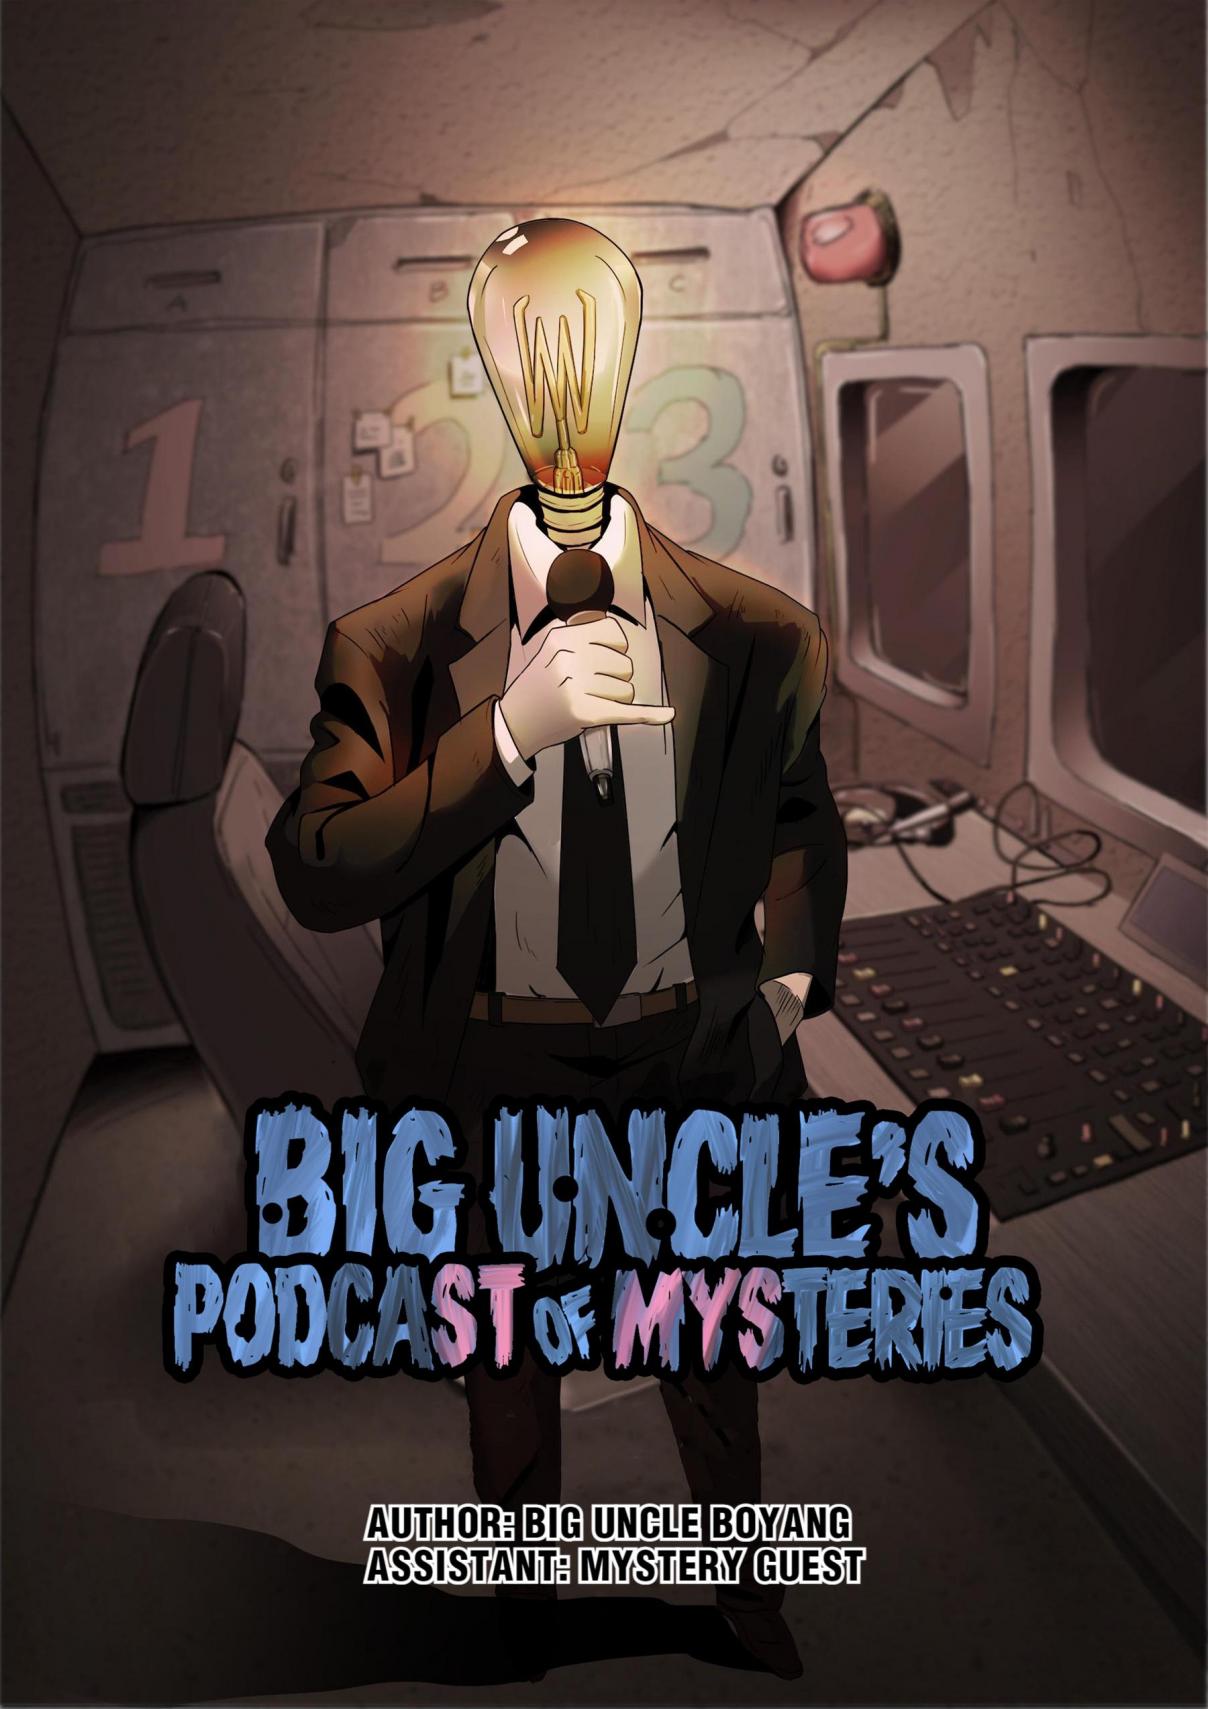 Big Uncle’s Podcast of Mysteries 3